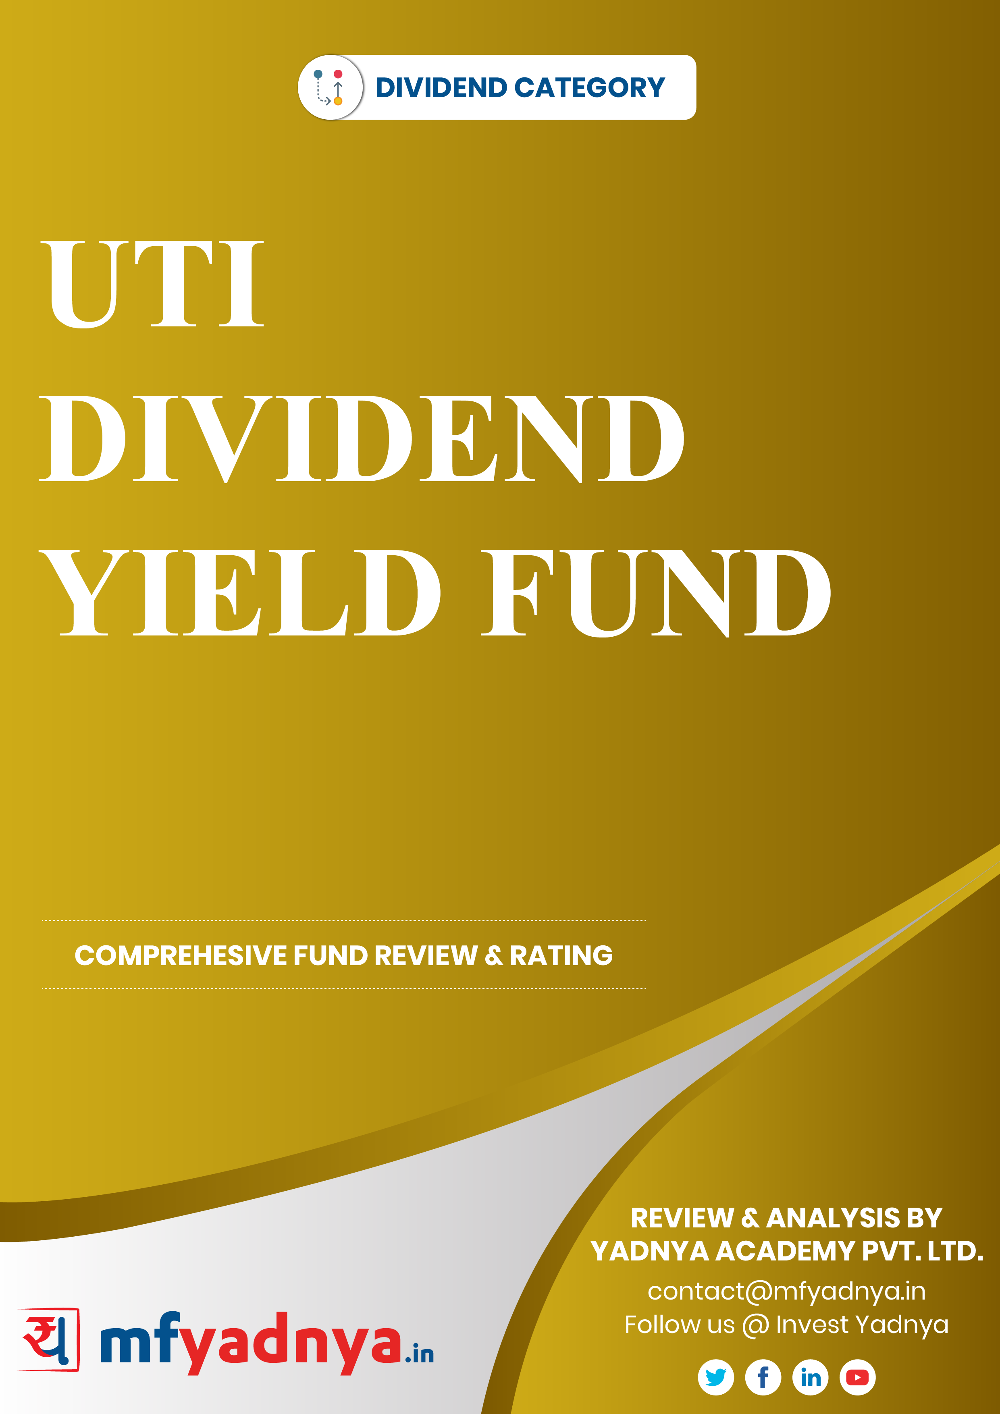 This e-book offers a comprehensive mutual fund review of UTI Dividend Yield Fund. It reviews the fund's return, ratio, allocation etc. ✔ Detailed Mutual Fund Analysis ✔ Latest Research Reports